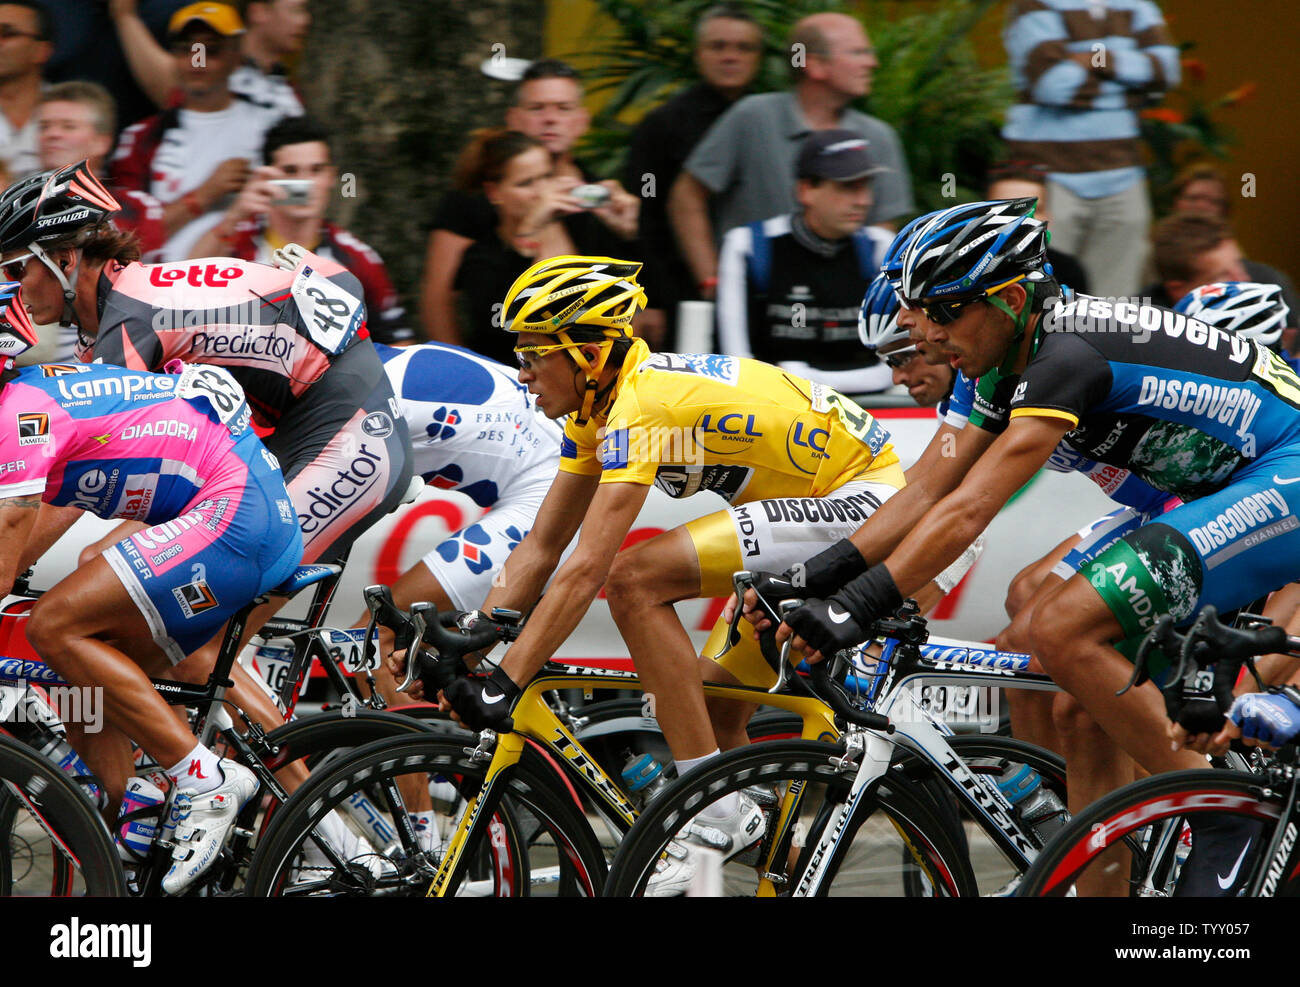 Spaniard Alberto Contador (yellow jersey) is protected by his Discovery Channel teammates during the final stage of the Tour de France in Paris on July 29, 2007.   Contador went on to win this year's Tour, becoming the first Spaniard since Miguel Indurain in 1995 to do so.   (UPI Photo/ David Silpa) Stock Photo